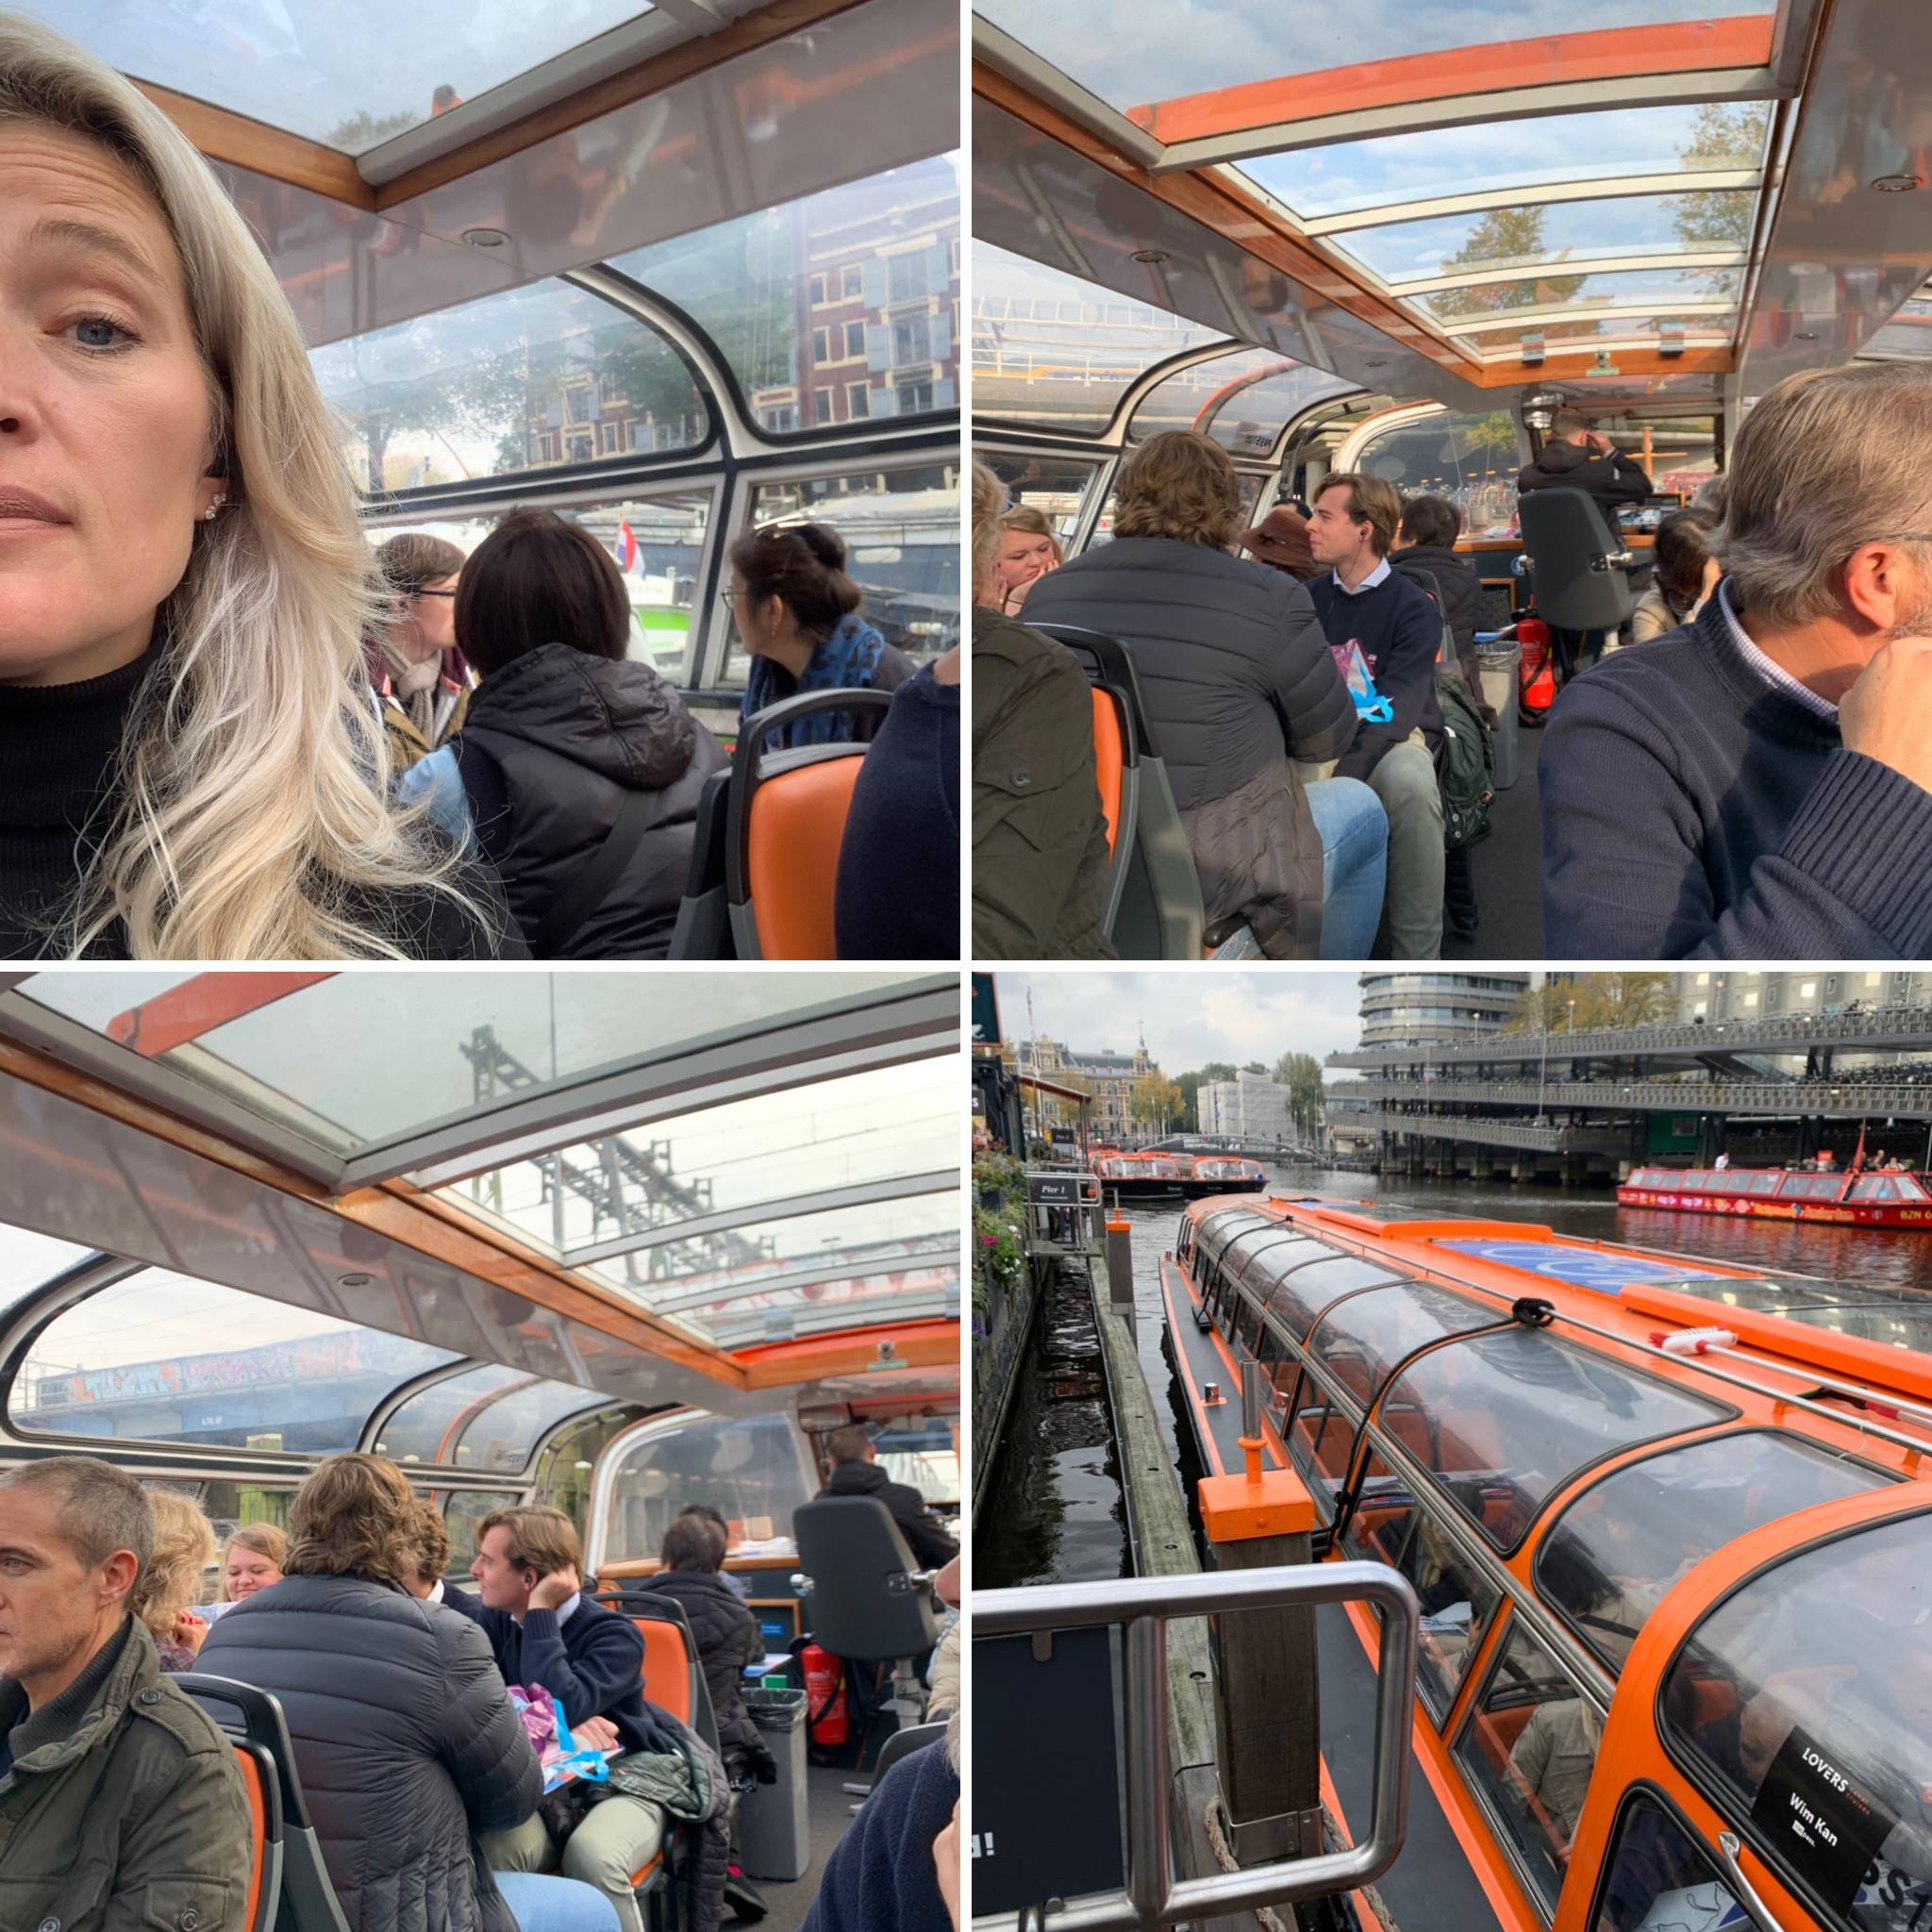 #TRAVELLING THROUGH AMSTERDAM BY BOAT